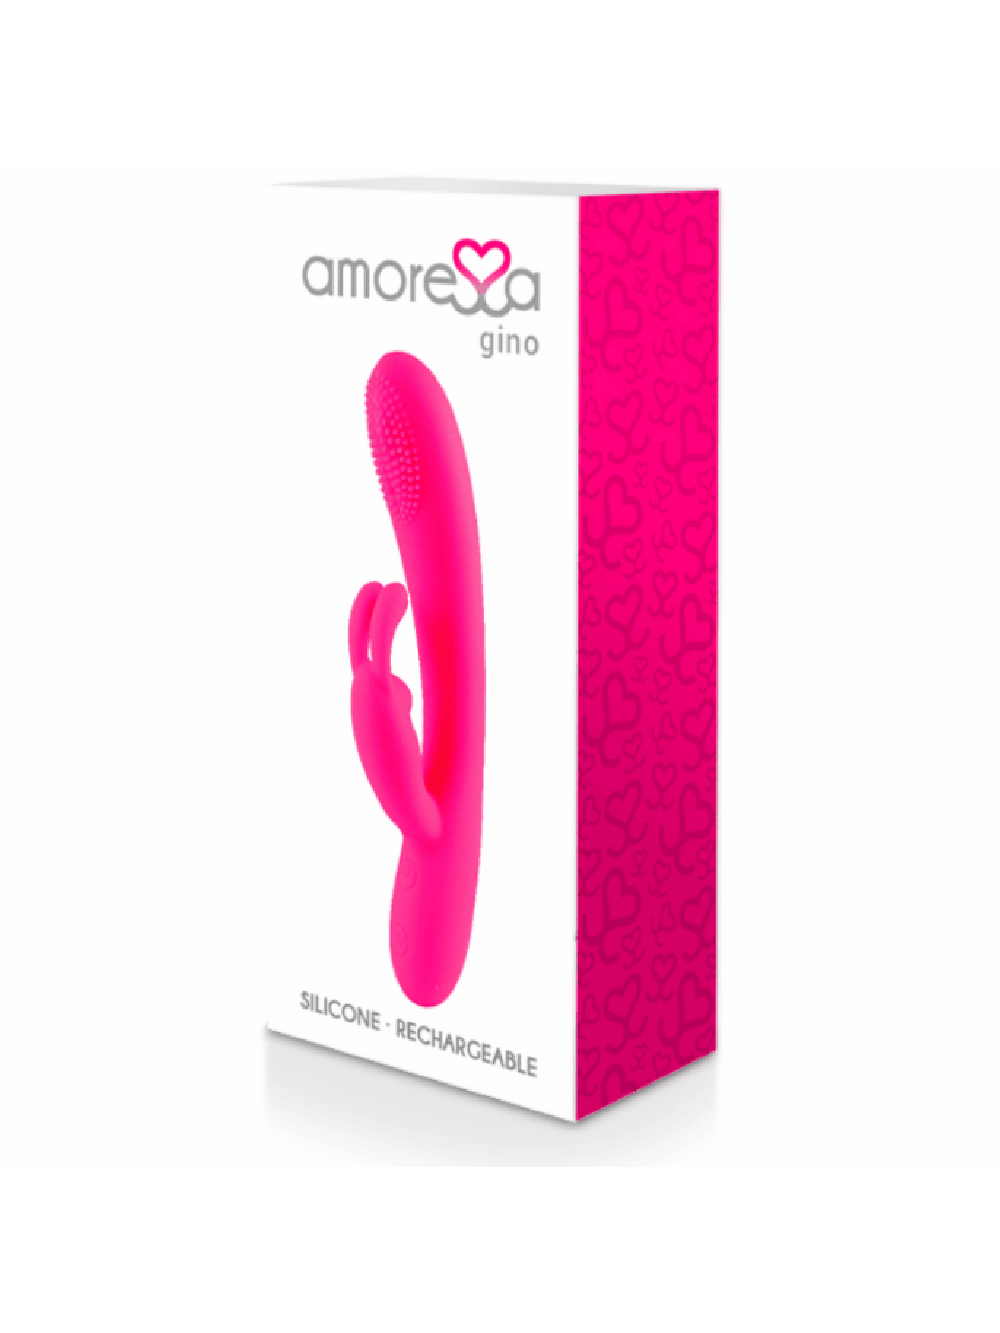 GINO PREMIUM SILICONE RECHARGEABLE 8425402155790